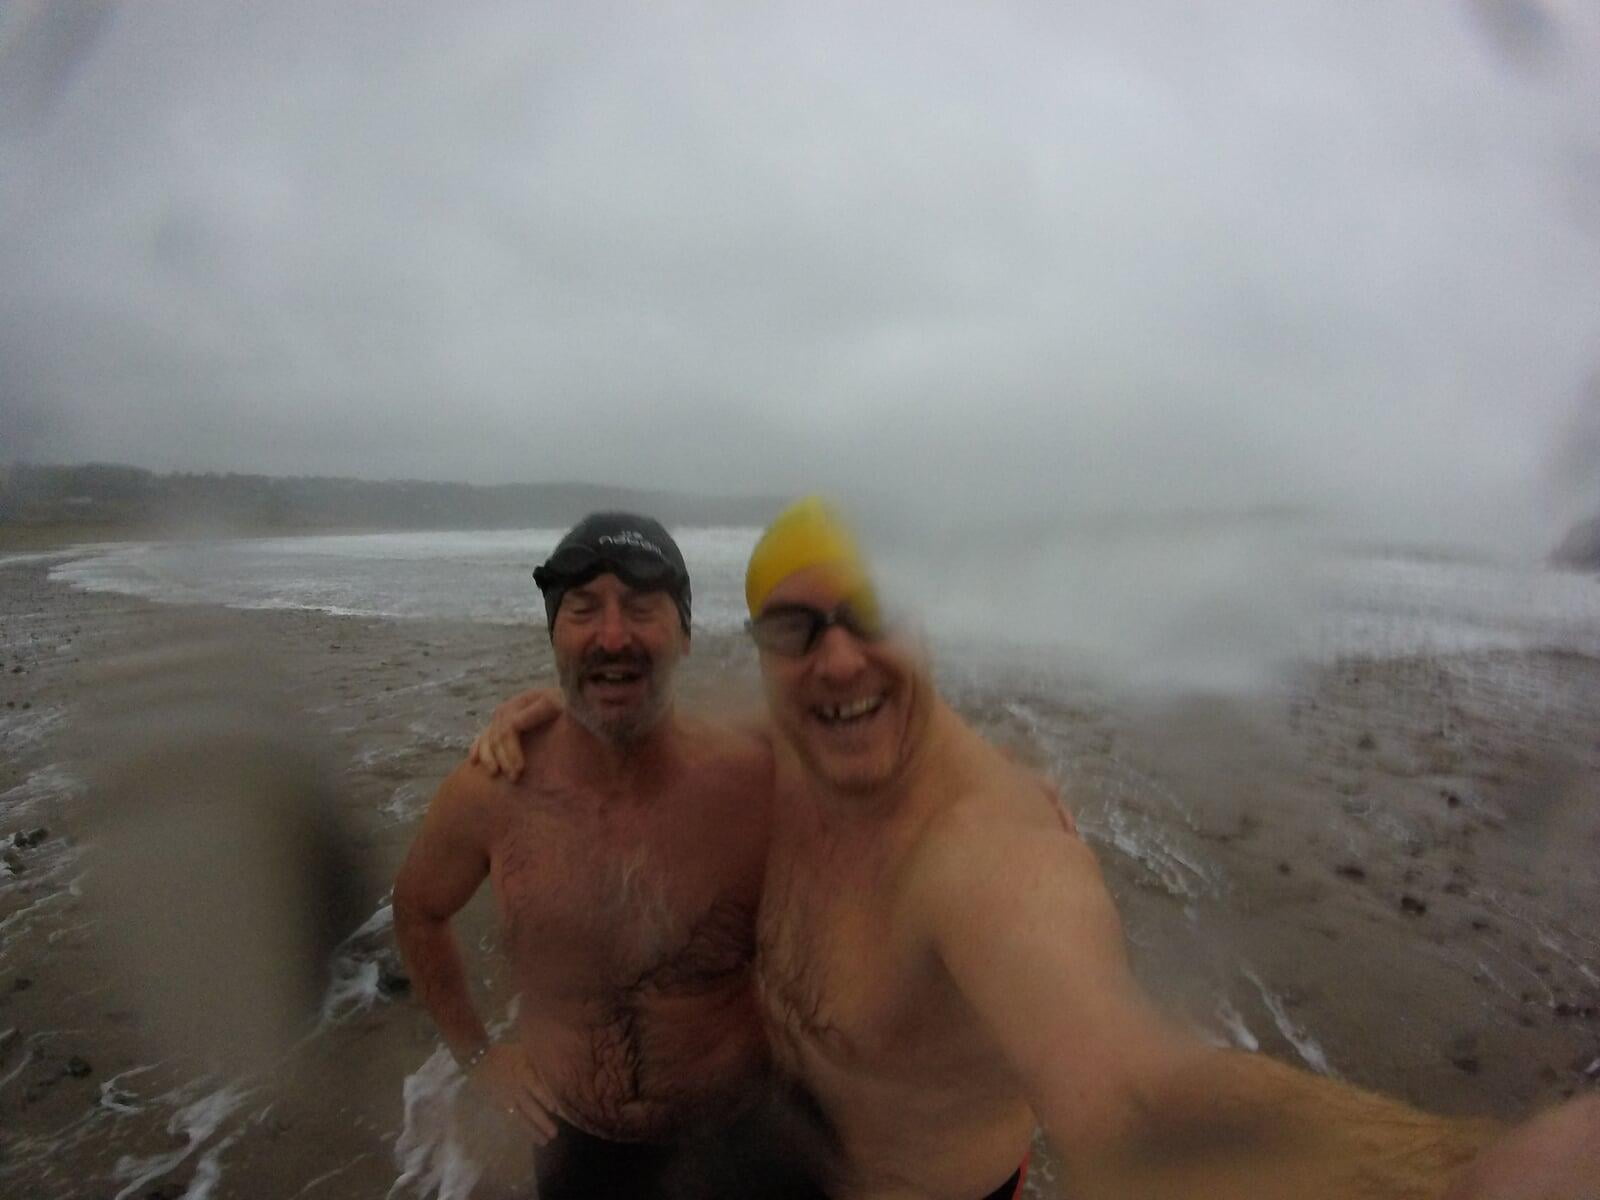 Cold water swimming often results in euphoria